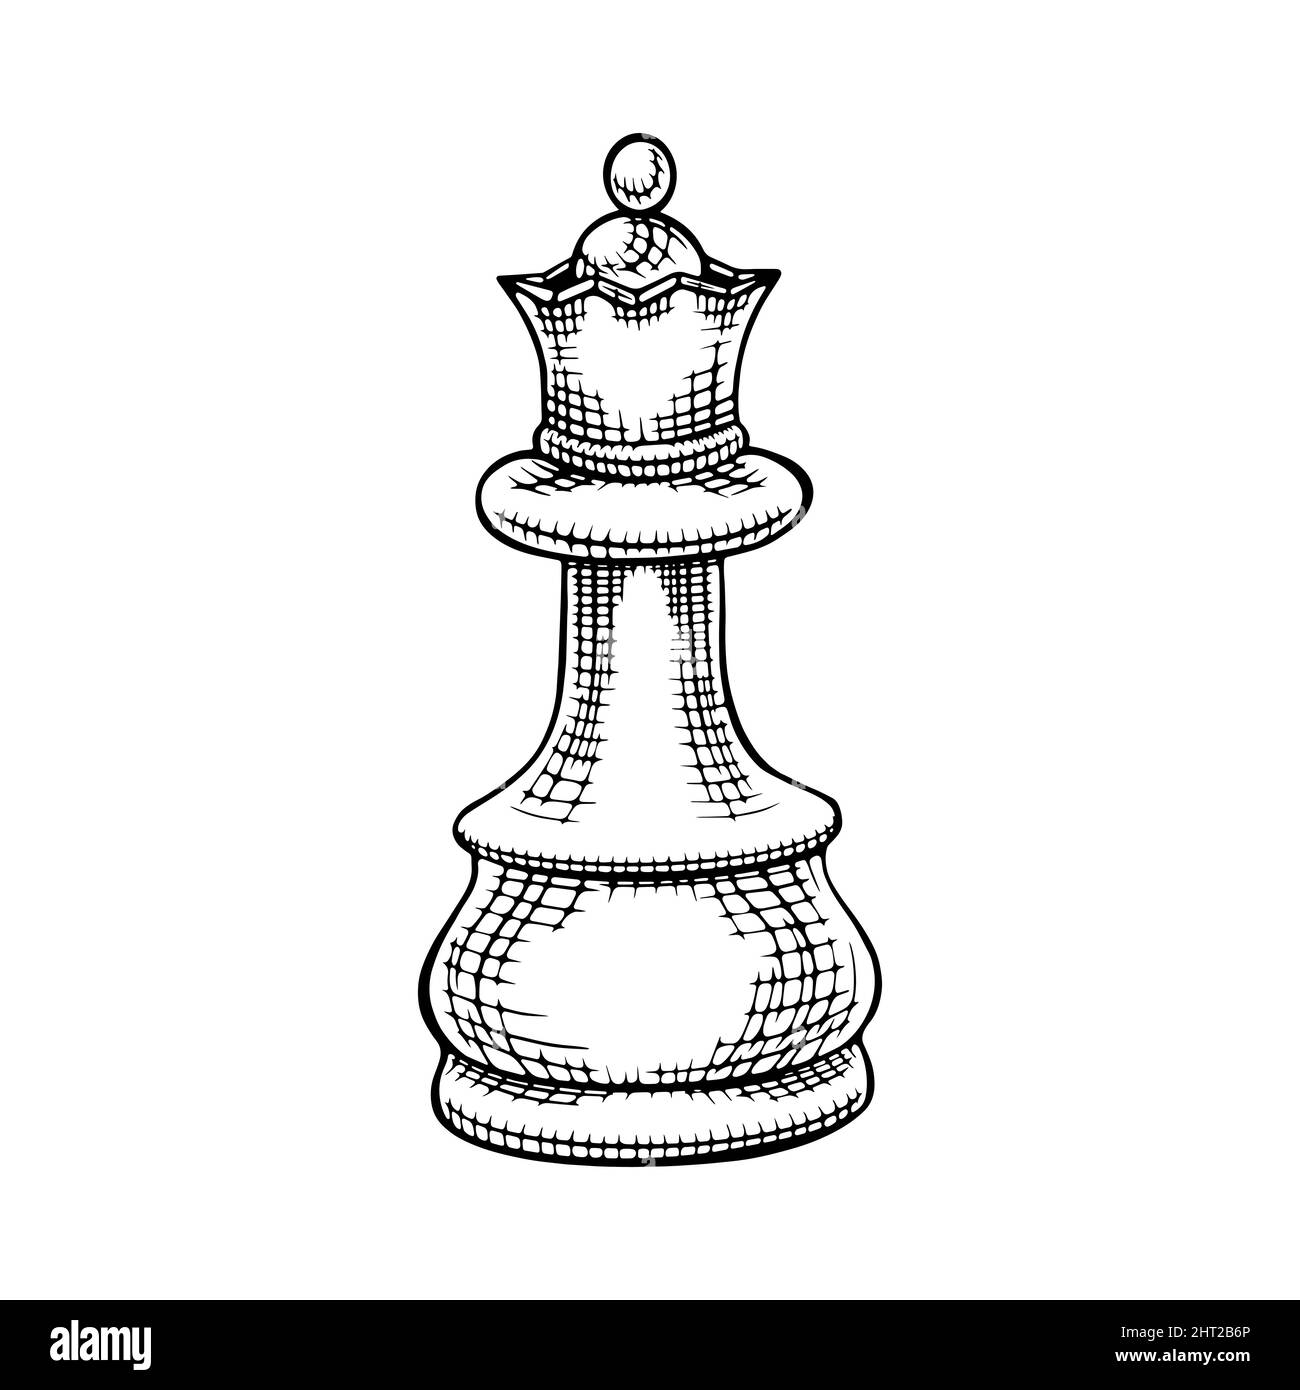 The King: Chess Pieces by J.H. Donner